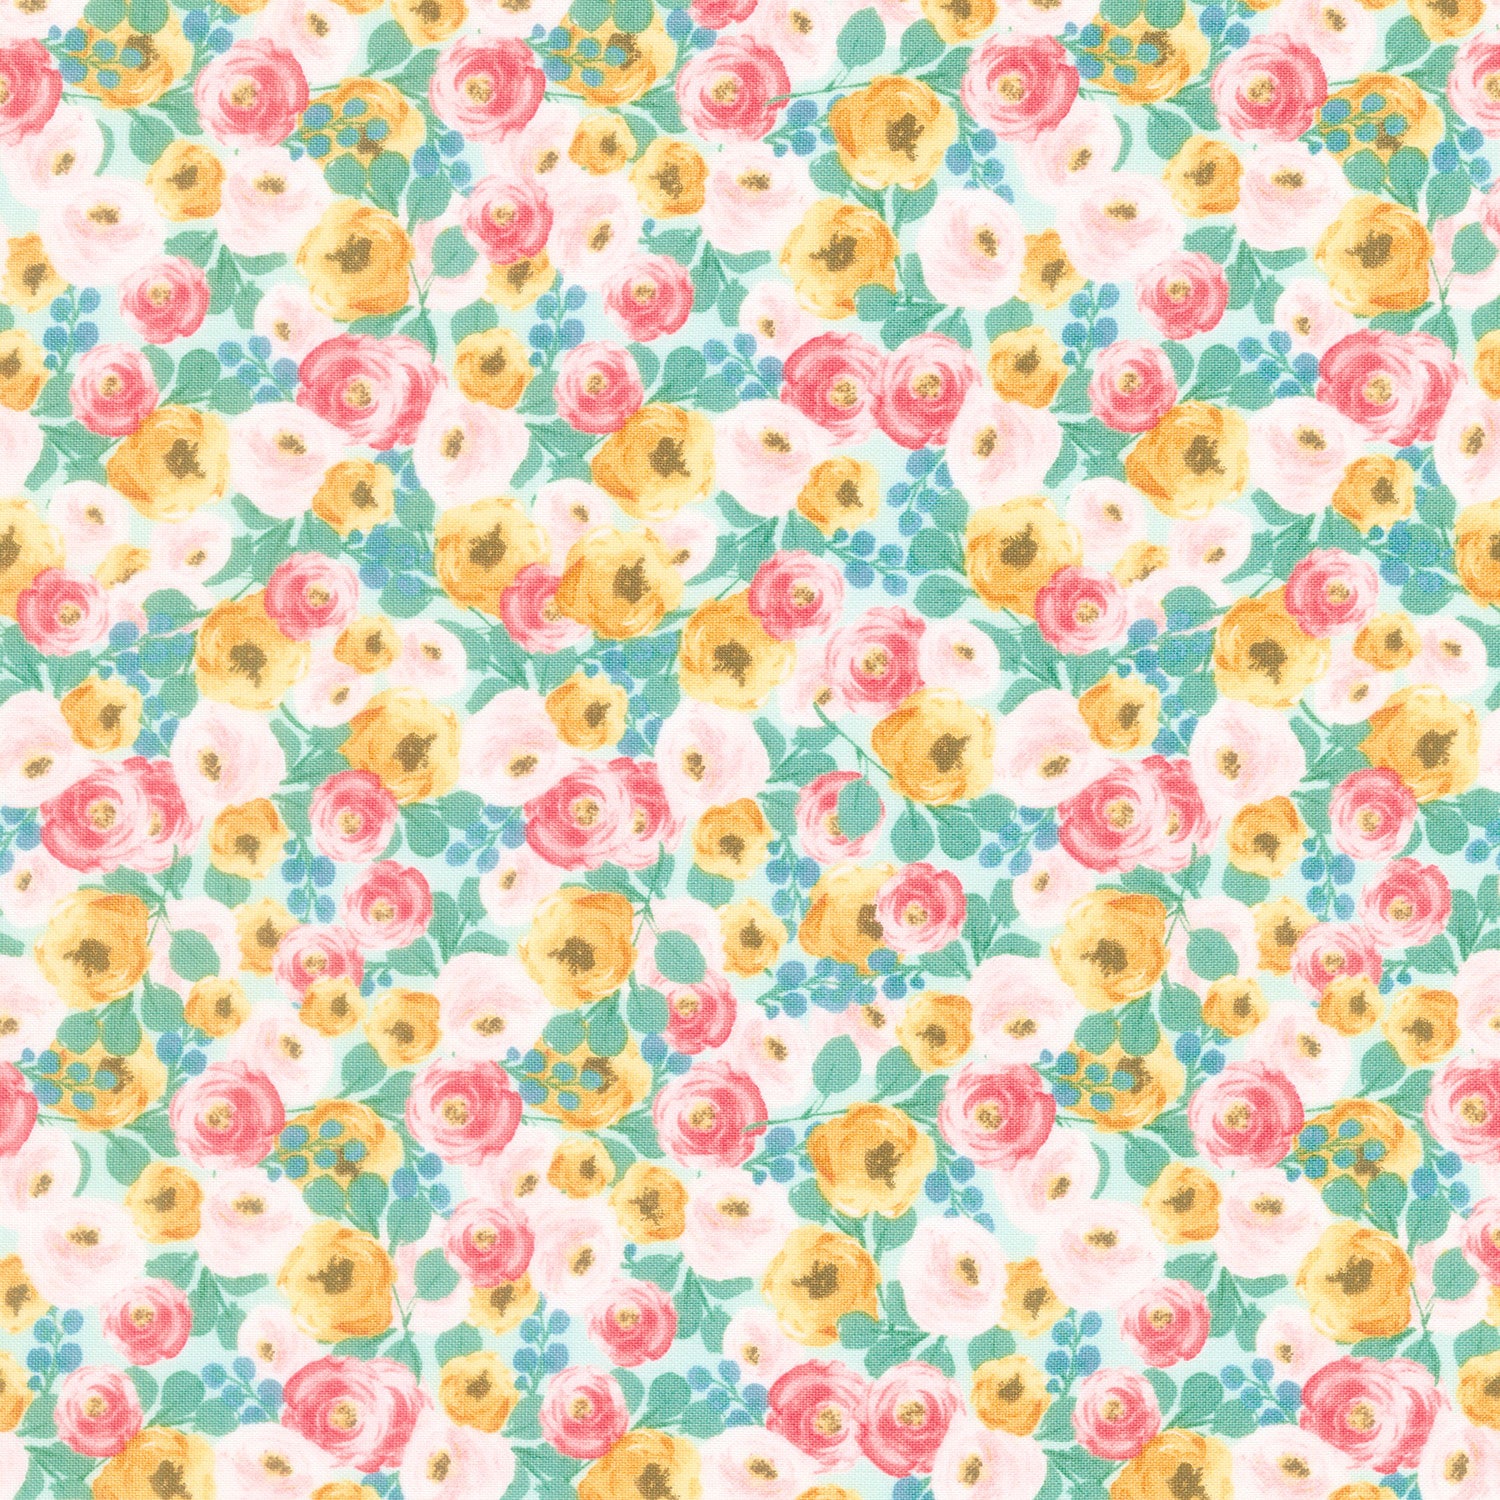 Florals - Fabric Pattern Design AGG-4427